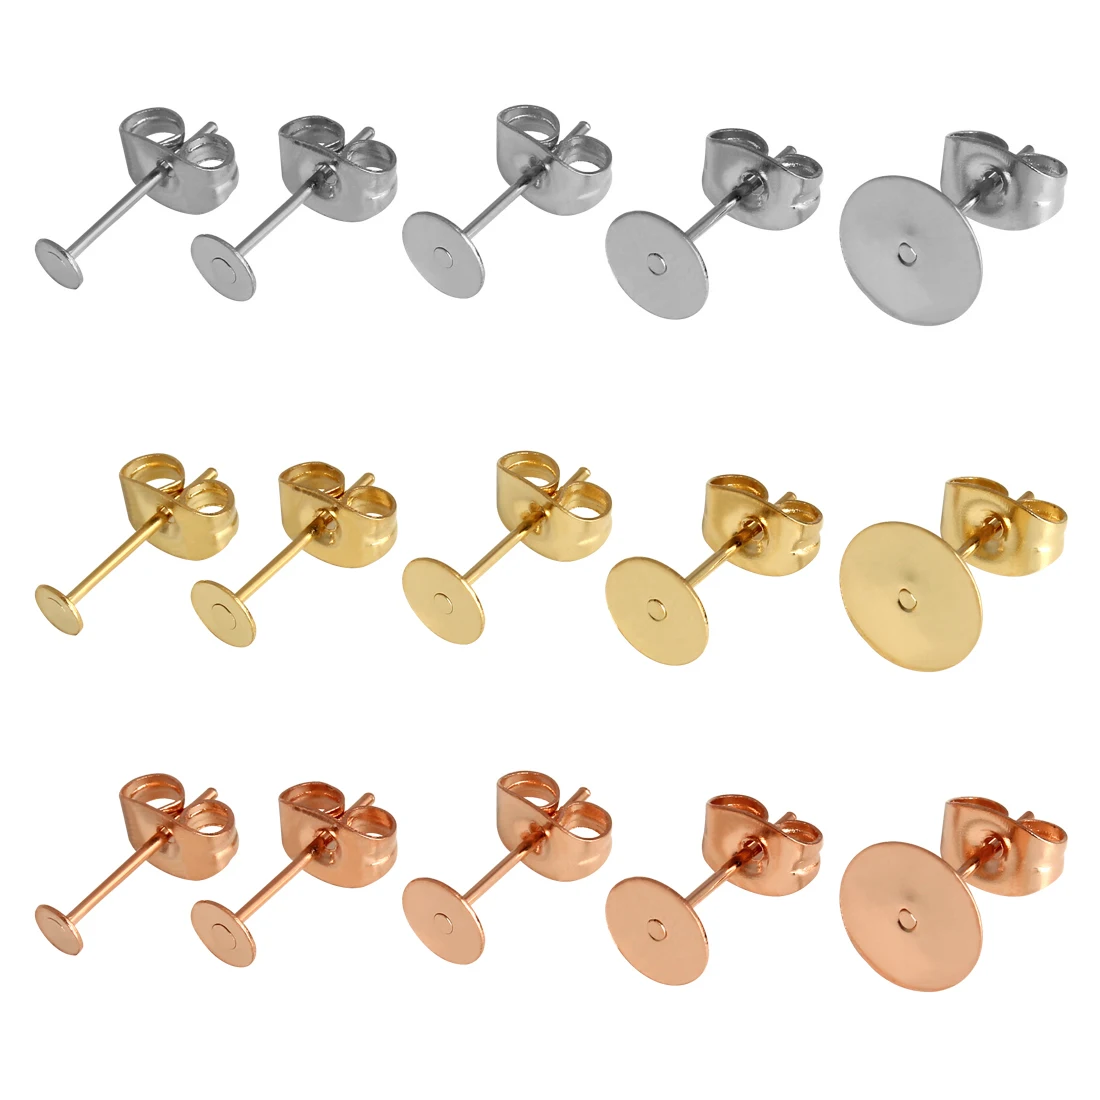 

50pcs/lot Gold Stainless Steel Earring Studs Blank Post Base Pins With Earring Plug Finding Earring Backs for DIY Jewelry Making